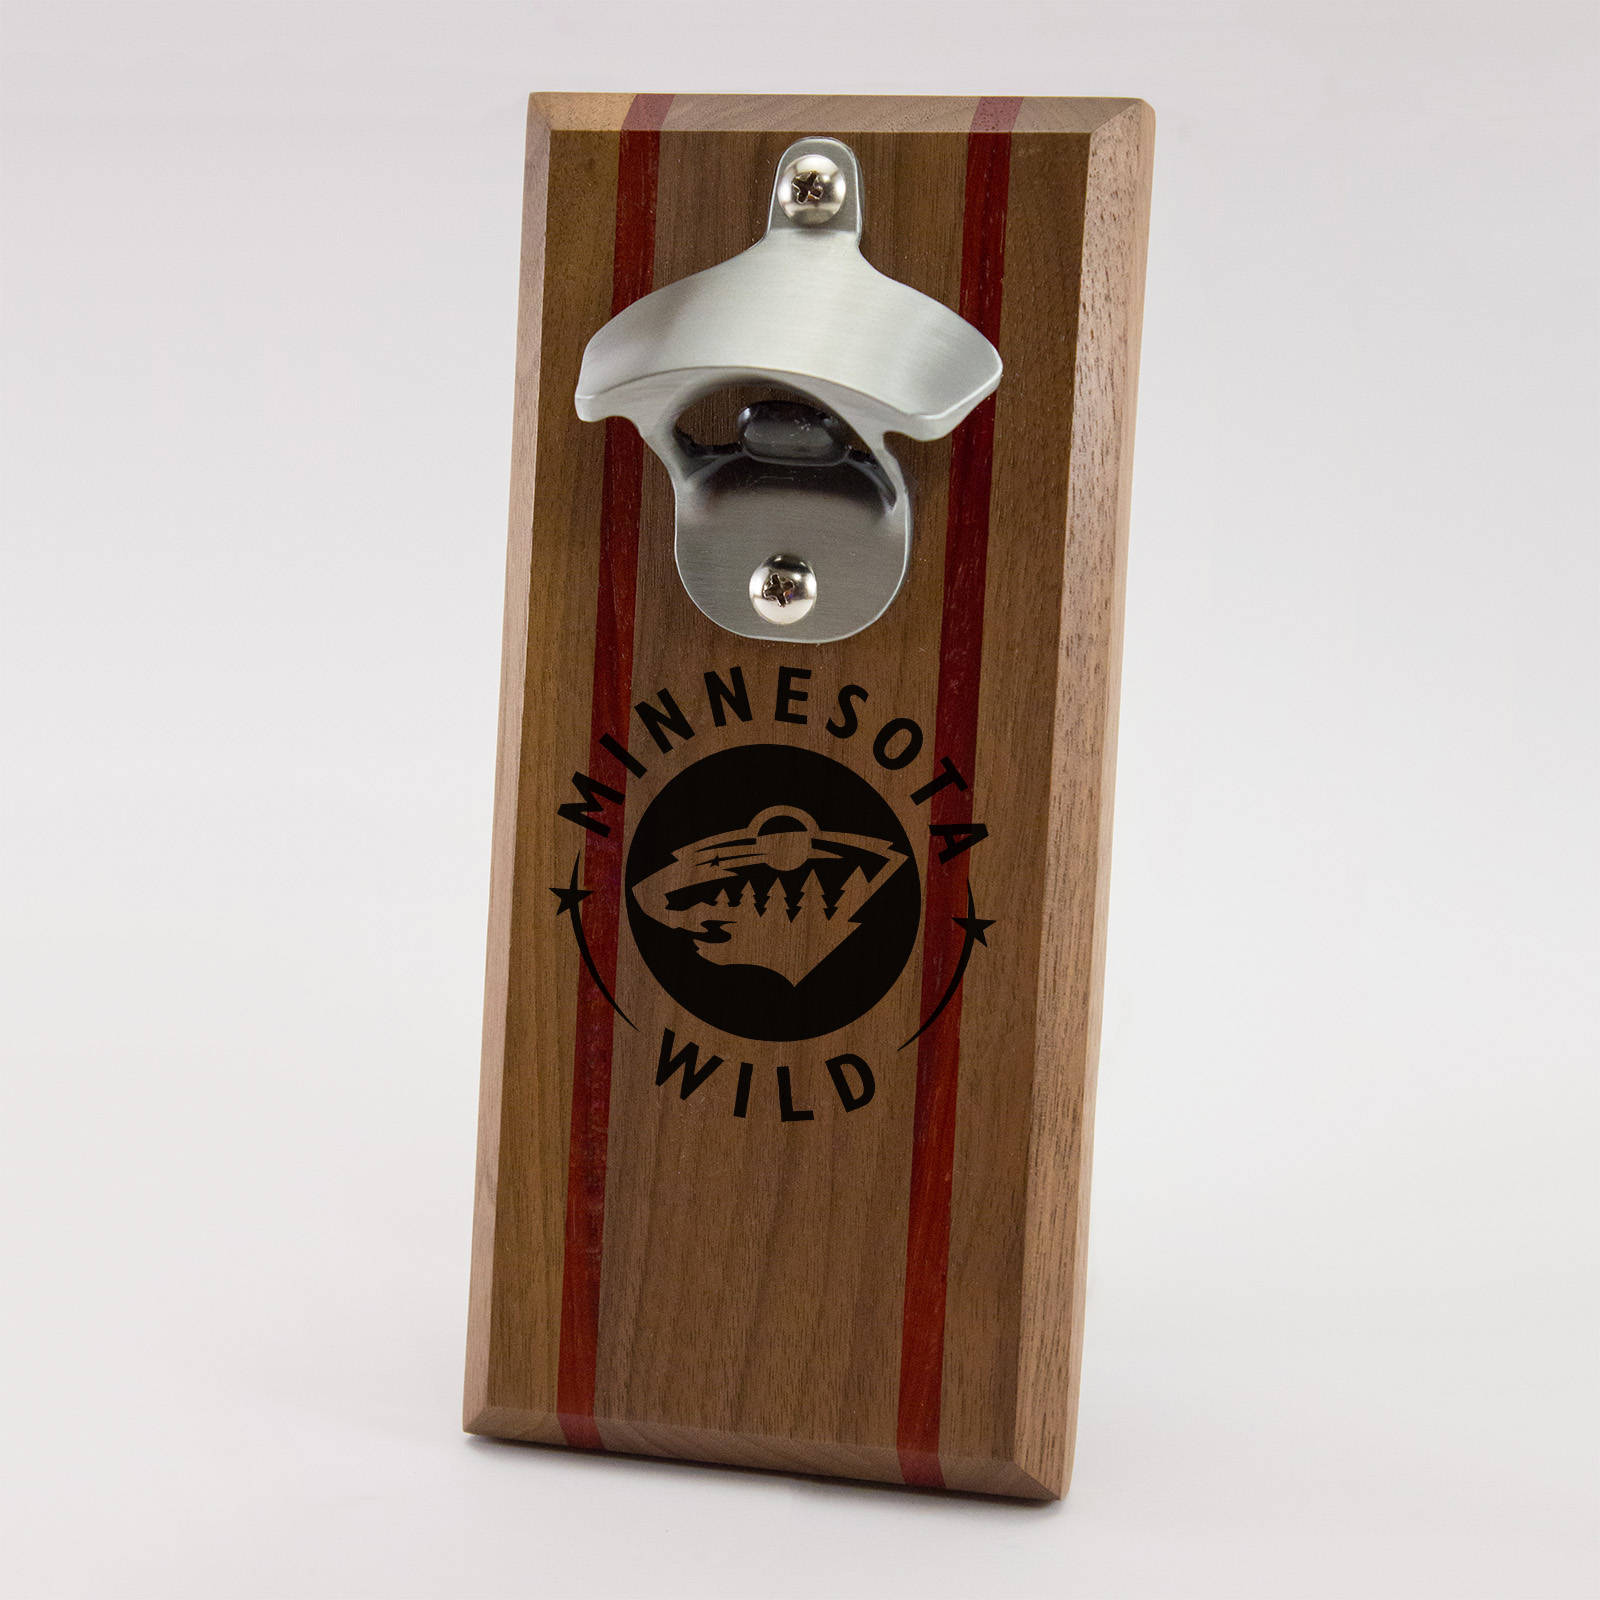 Minnesota Wild, Bottle Opener made from a Real Hockey Puck